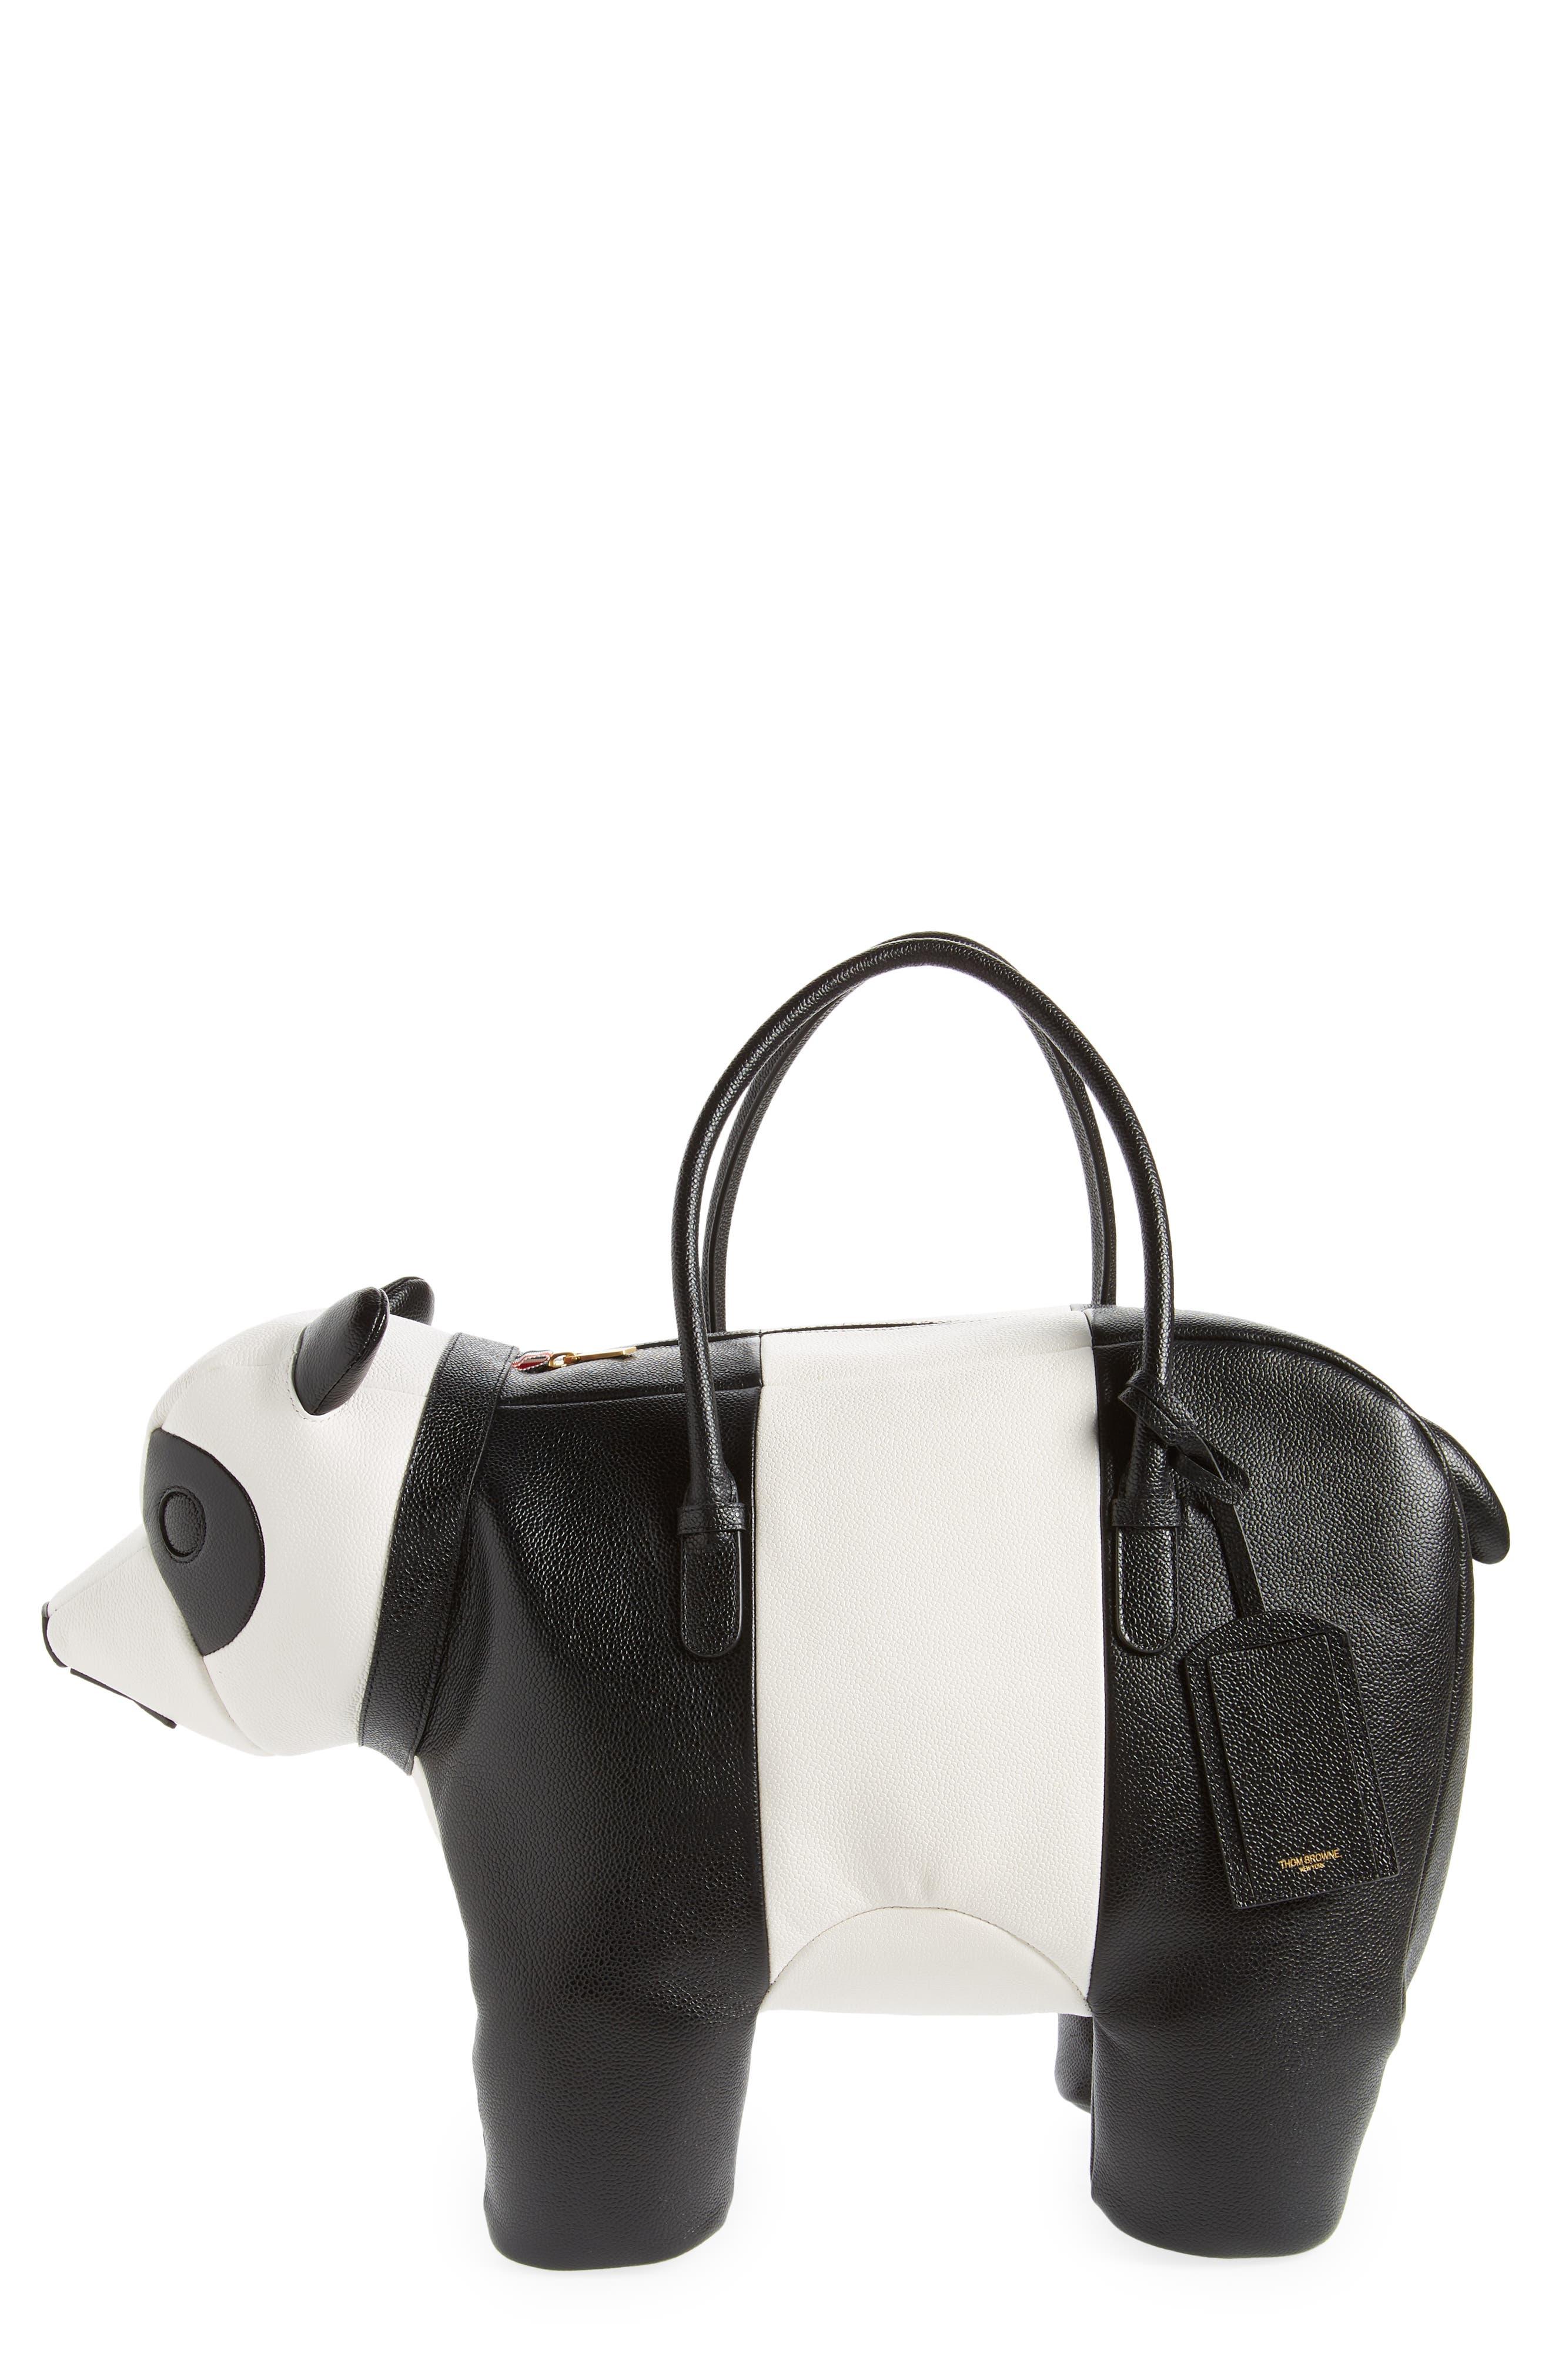 Buy Cute Backpack Purse for Girls Women Animal Panda Mini Bag Leather  Backpacks, Black, Small, Traveling at Amazon.in